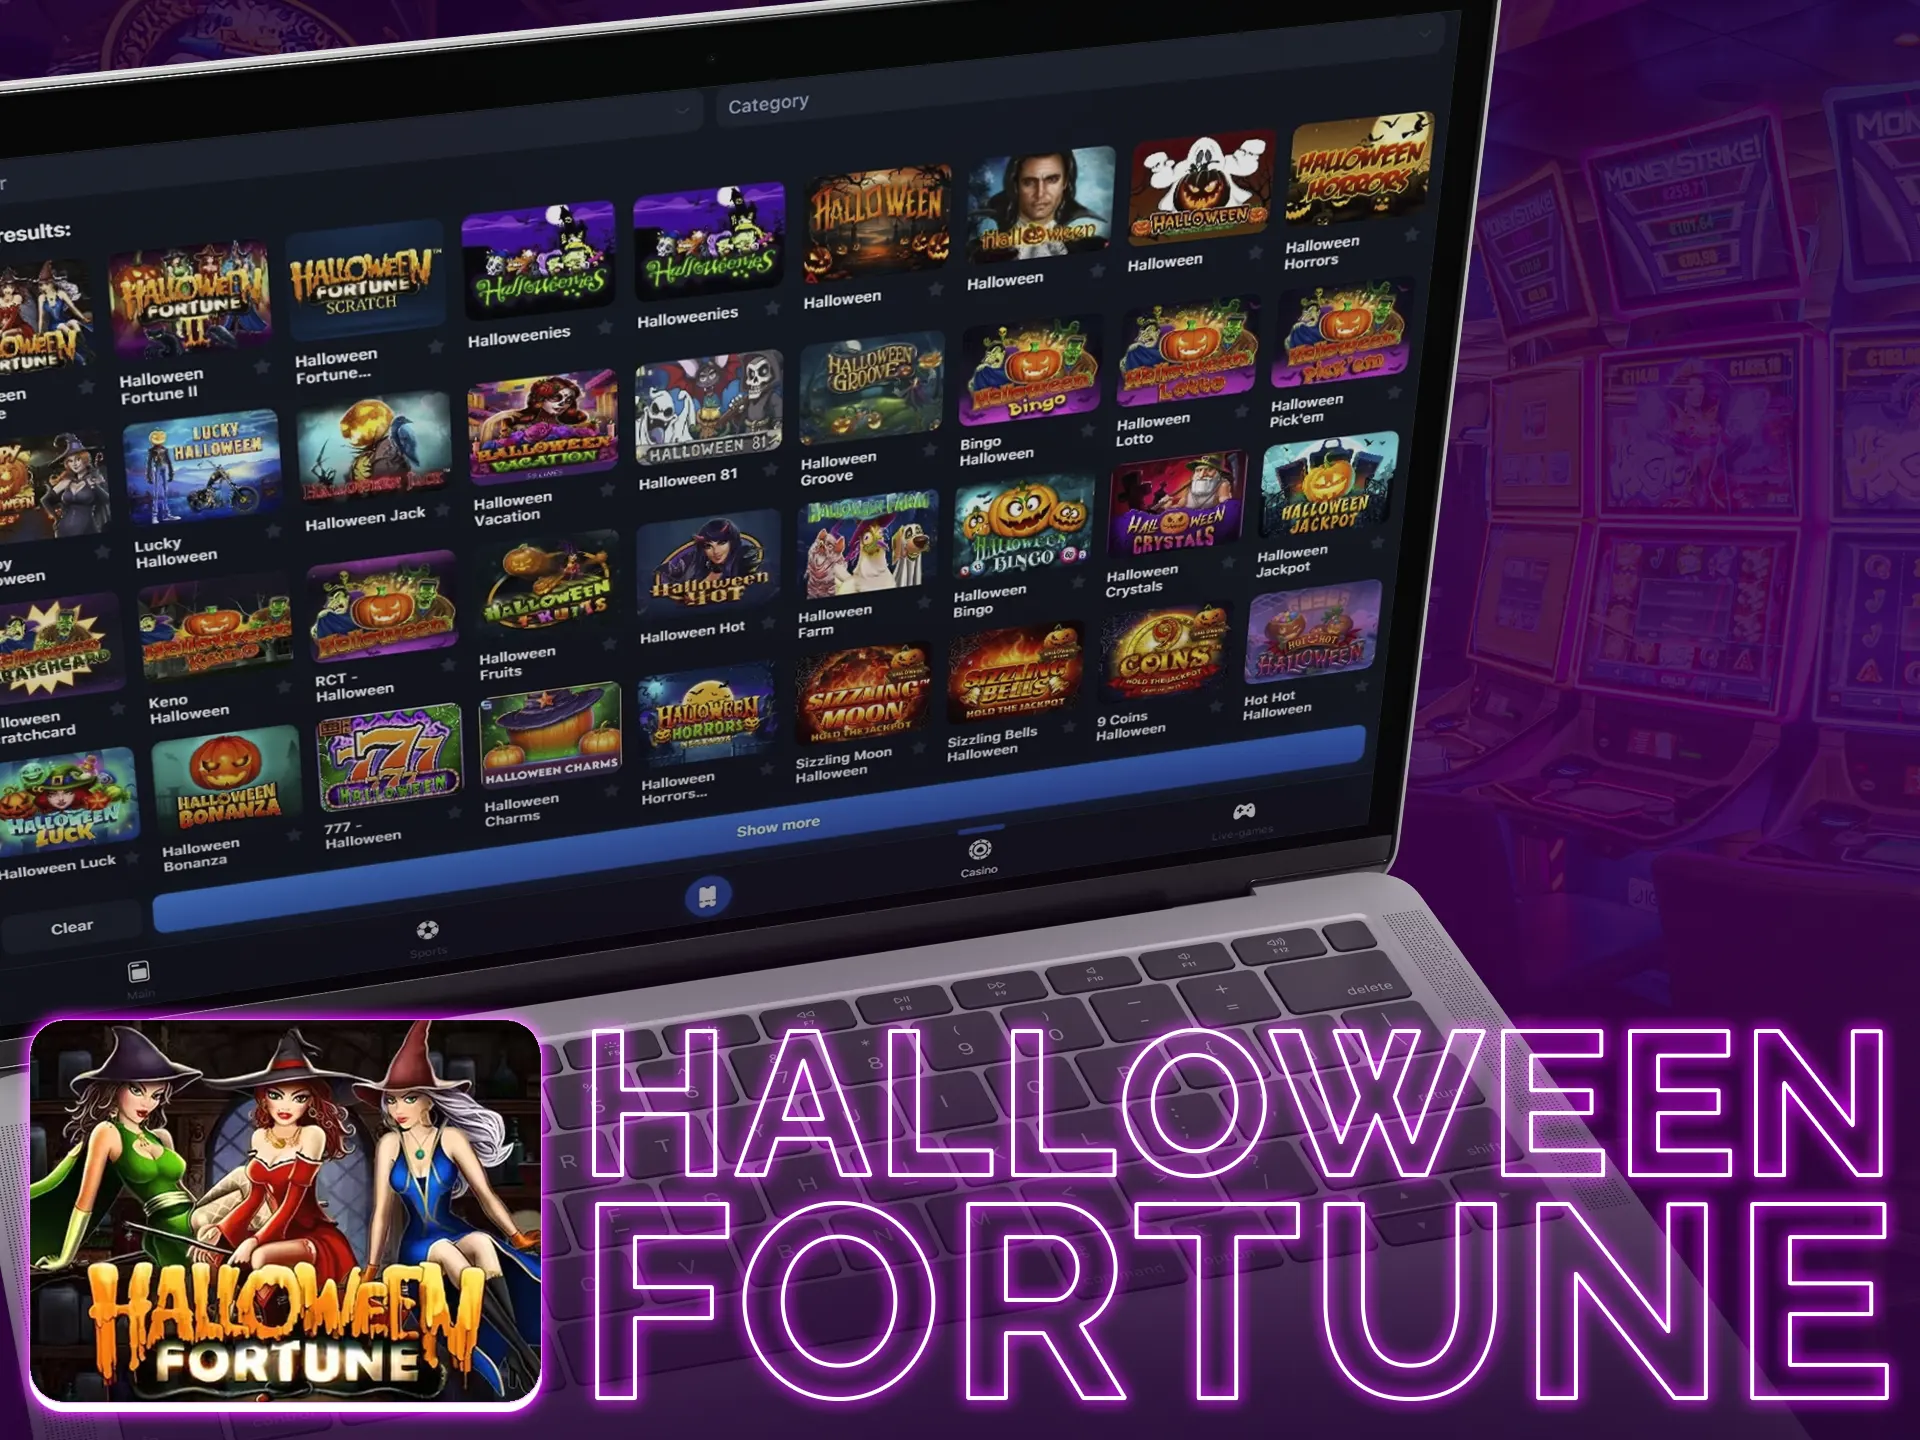 Feel the atmosphere of Halloween with Halloween Fortune slot.